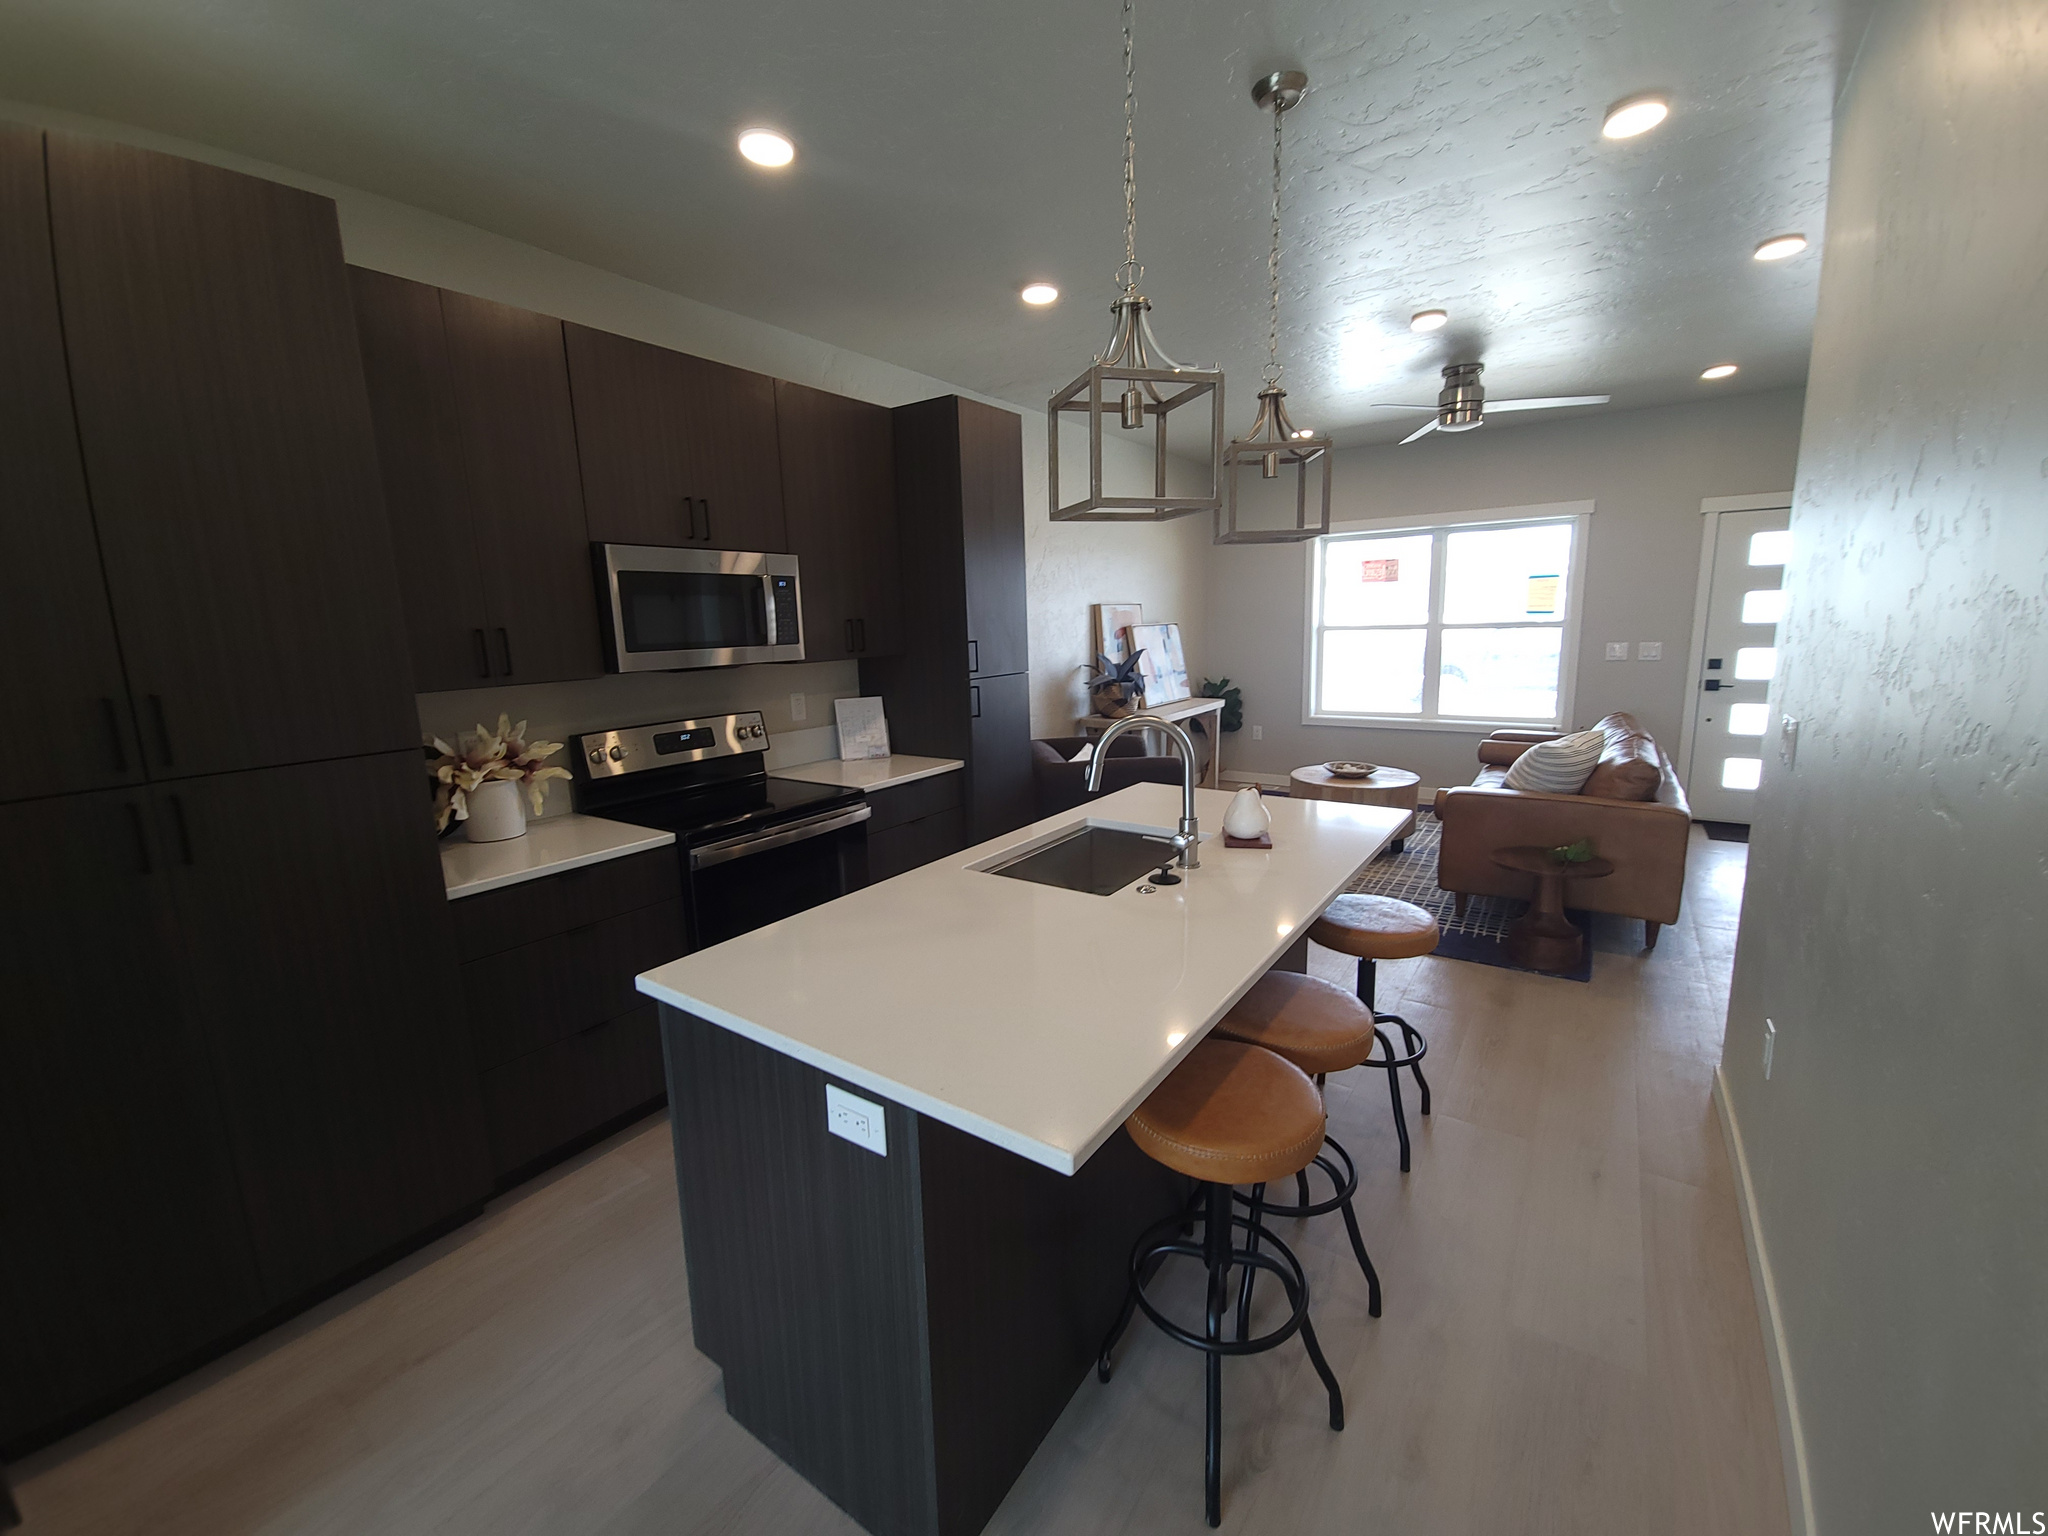 Kitchen featuring a breakfast bar area, a kitchen island, natural light, microwave, range oven, light hardwood flooring, light countertops, and dark brown cabinets